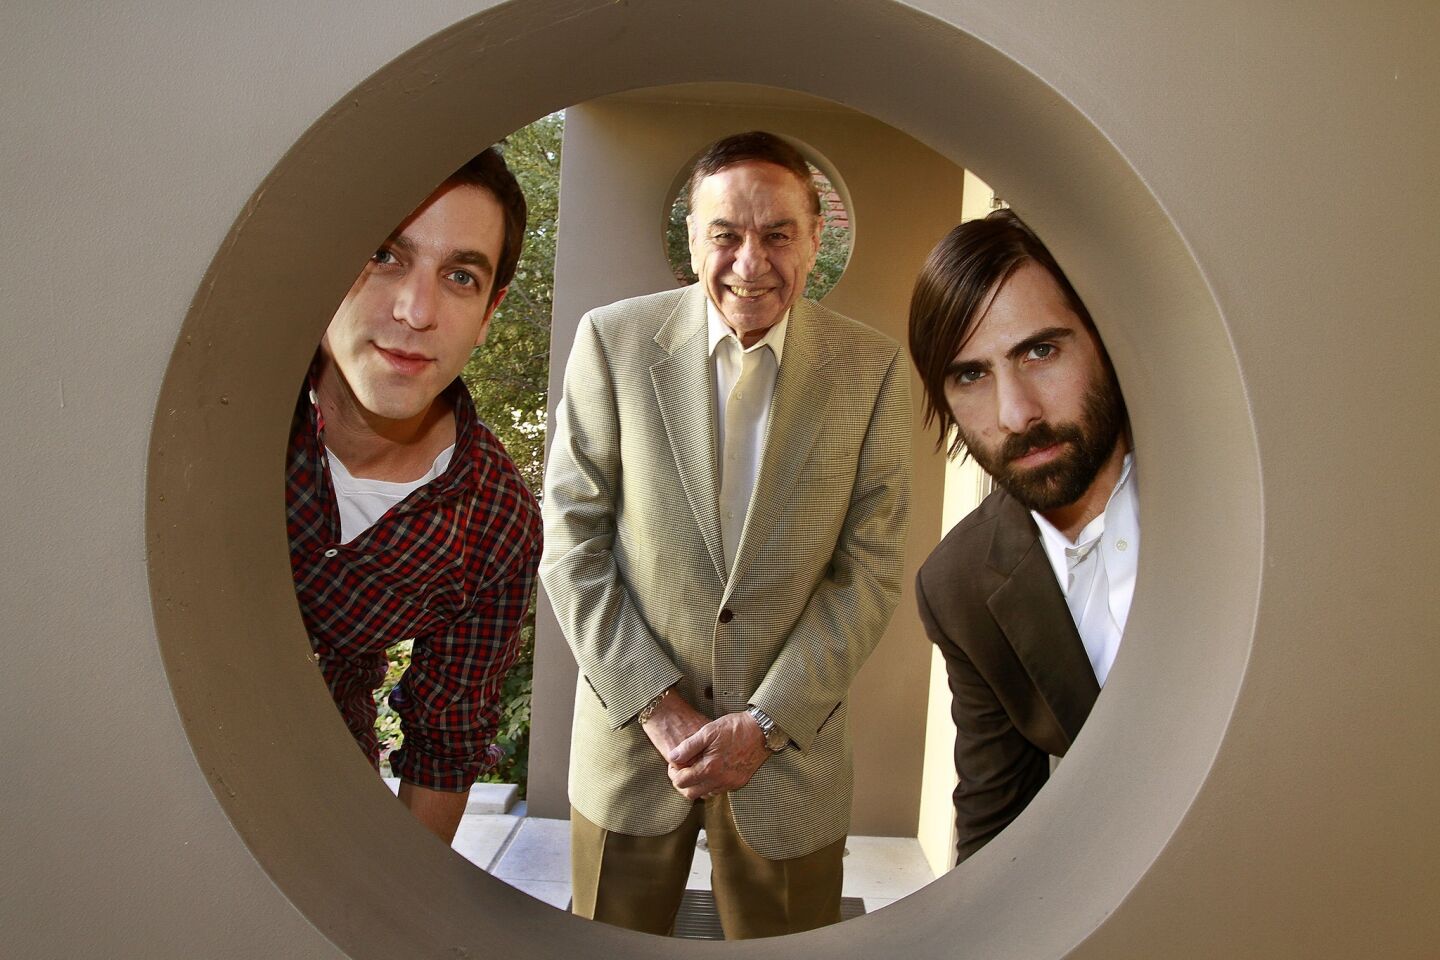 B.J. Novak, left, and Jason Schwartzman, right, who play legendary Disney songwriters Richard and Robert Sherman, join the real Richard Sherman for a chat on the new movie "Saving Mr. Banks," about the making of the 1964 "Mary Poppins" movie.